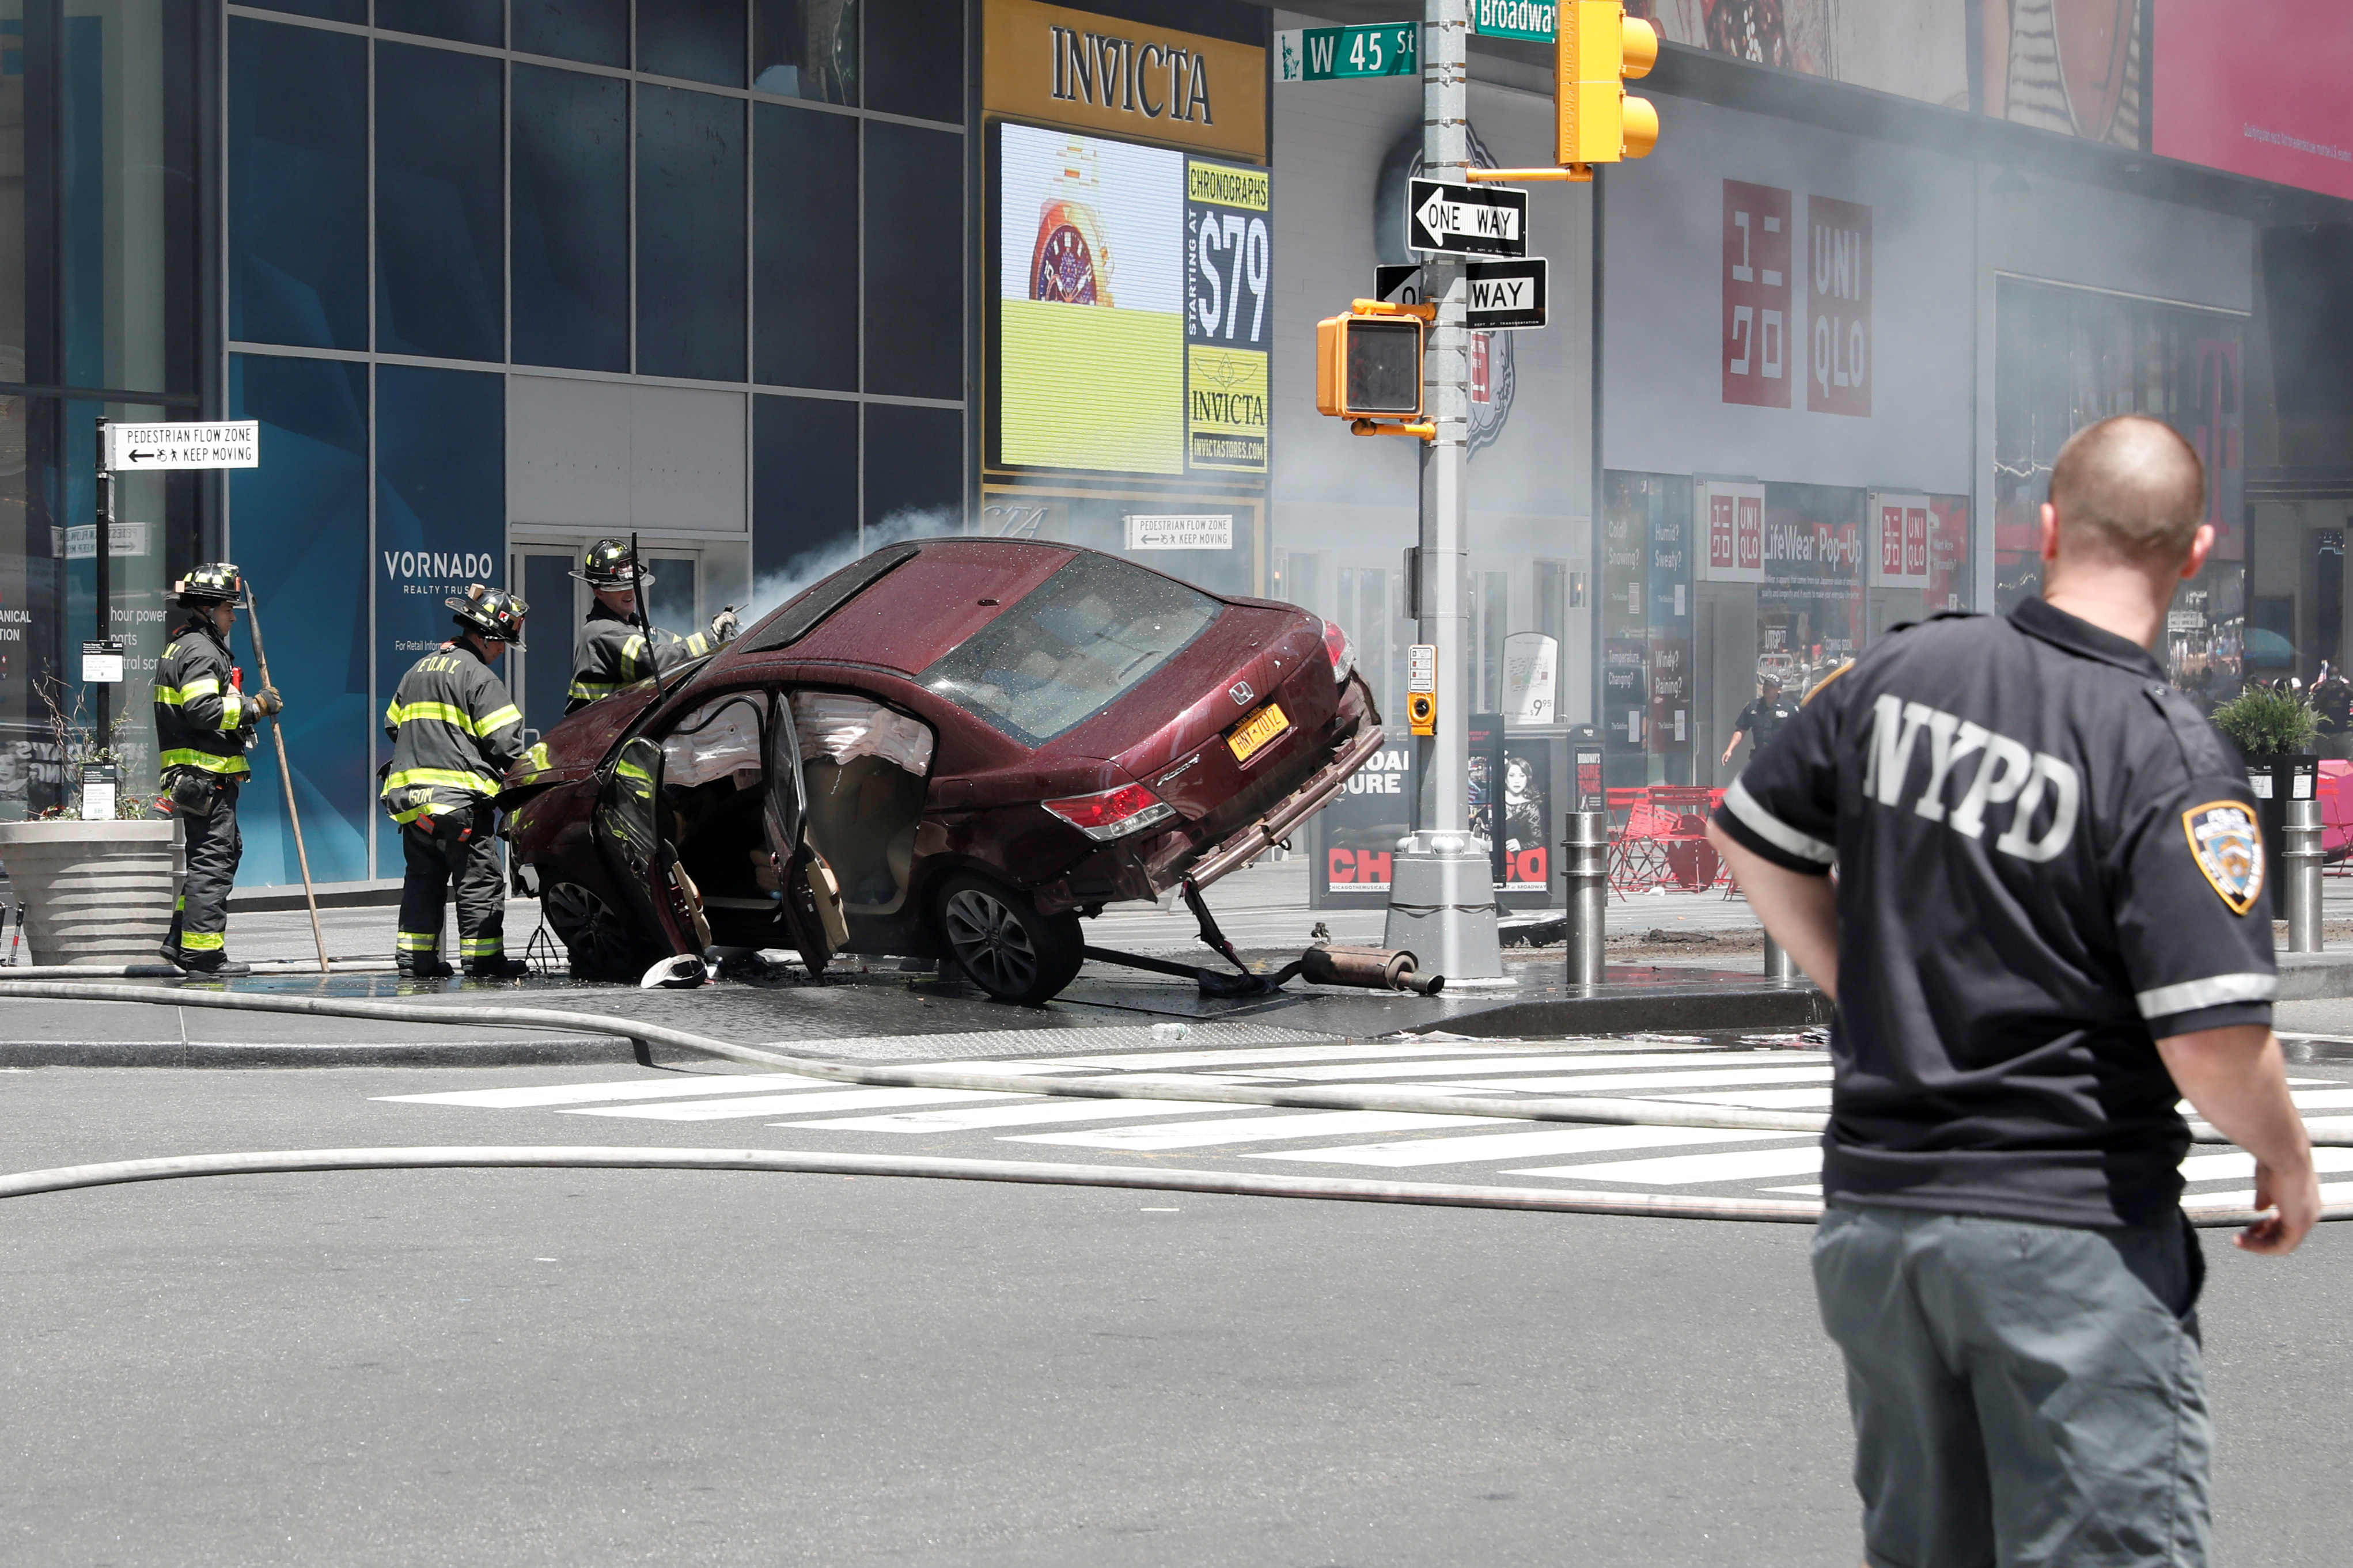 A vehicle that struck pedestrians in Times Square and later crashed is seen on the sidewalk in New York City